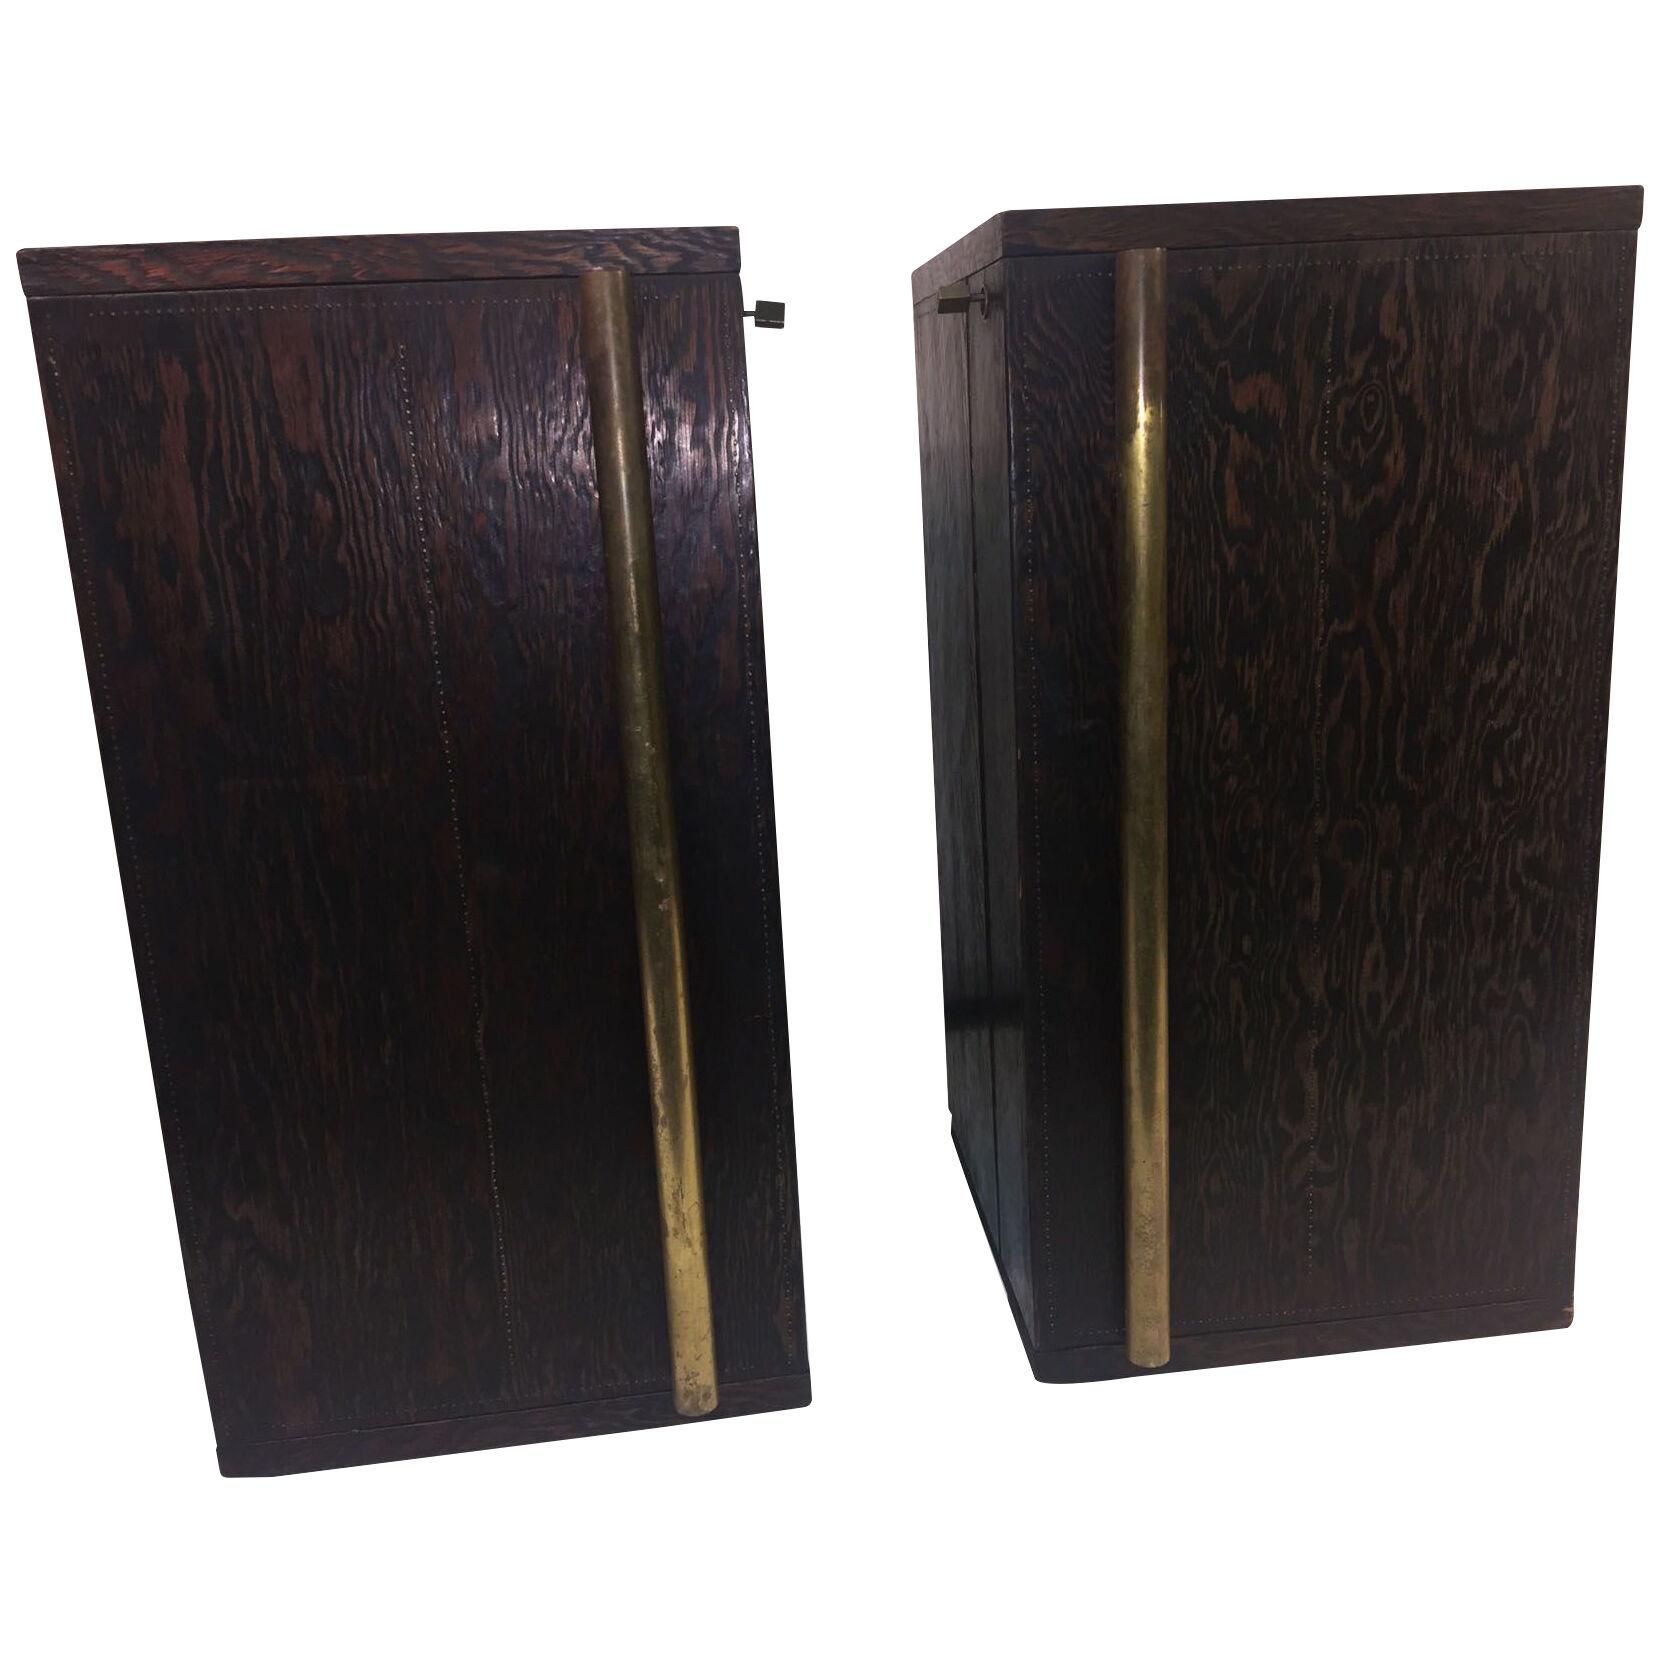 FINE AND RARE PAIR OF SIGNED ANDRE SORNAY ART DECO MODERNIST CABINETS